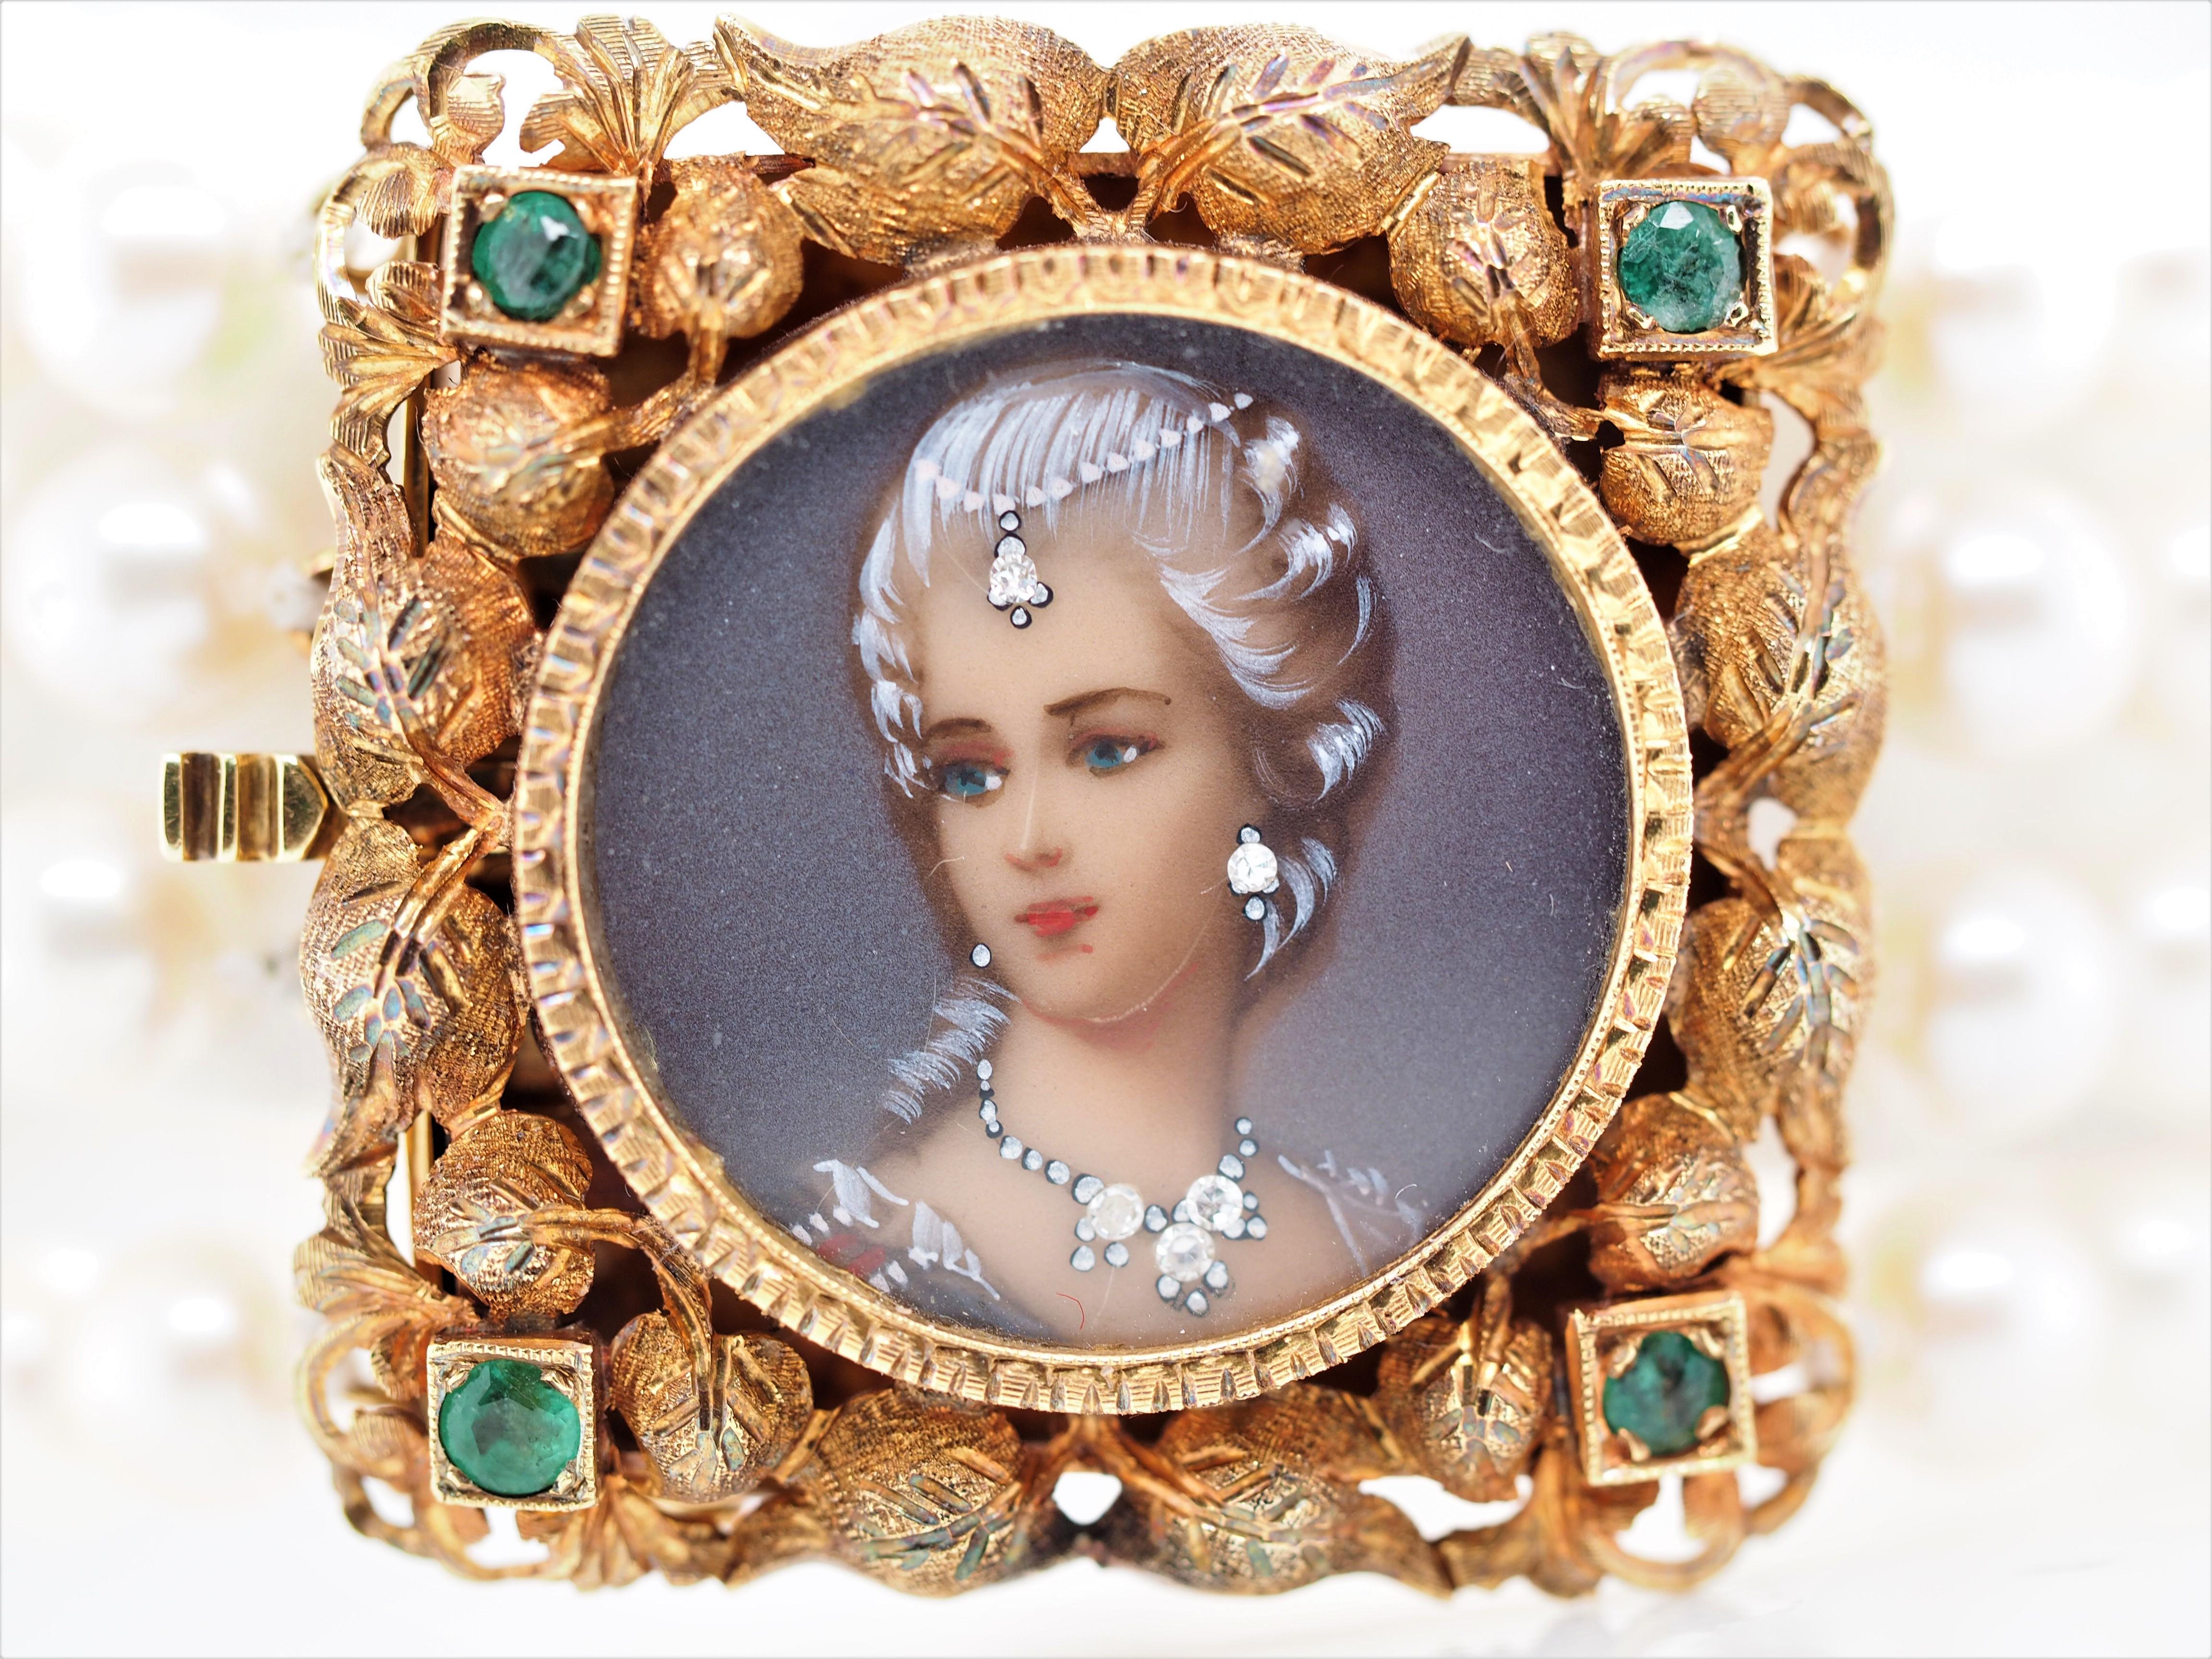 Circa Victorian revival era Corletto, Italy 18K Yellow Gold Akoya Pearls bracelet features a miniature hand painted portrait of a woman adorned with diamond jewelry. The portrait is accented with 5 round single cut diamonds and 4 round cut emeralds.